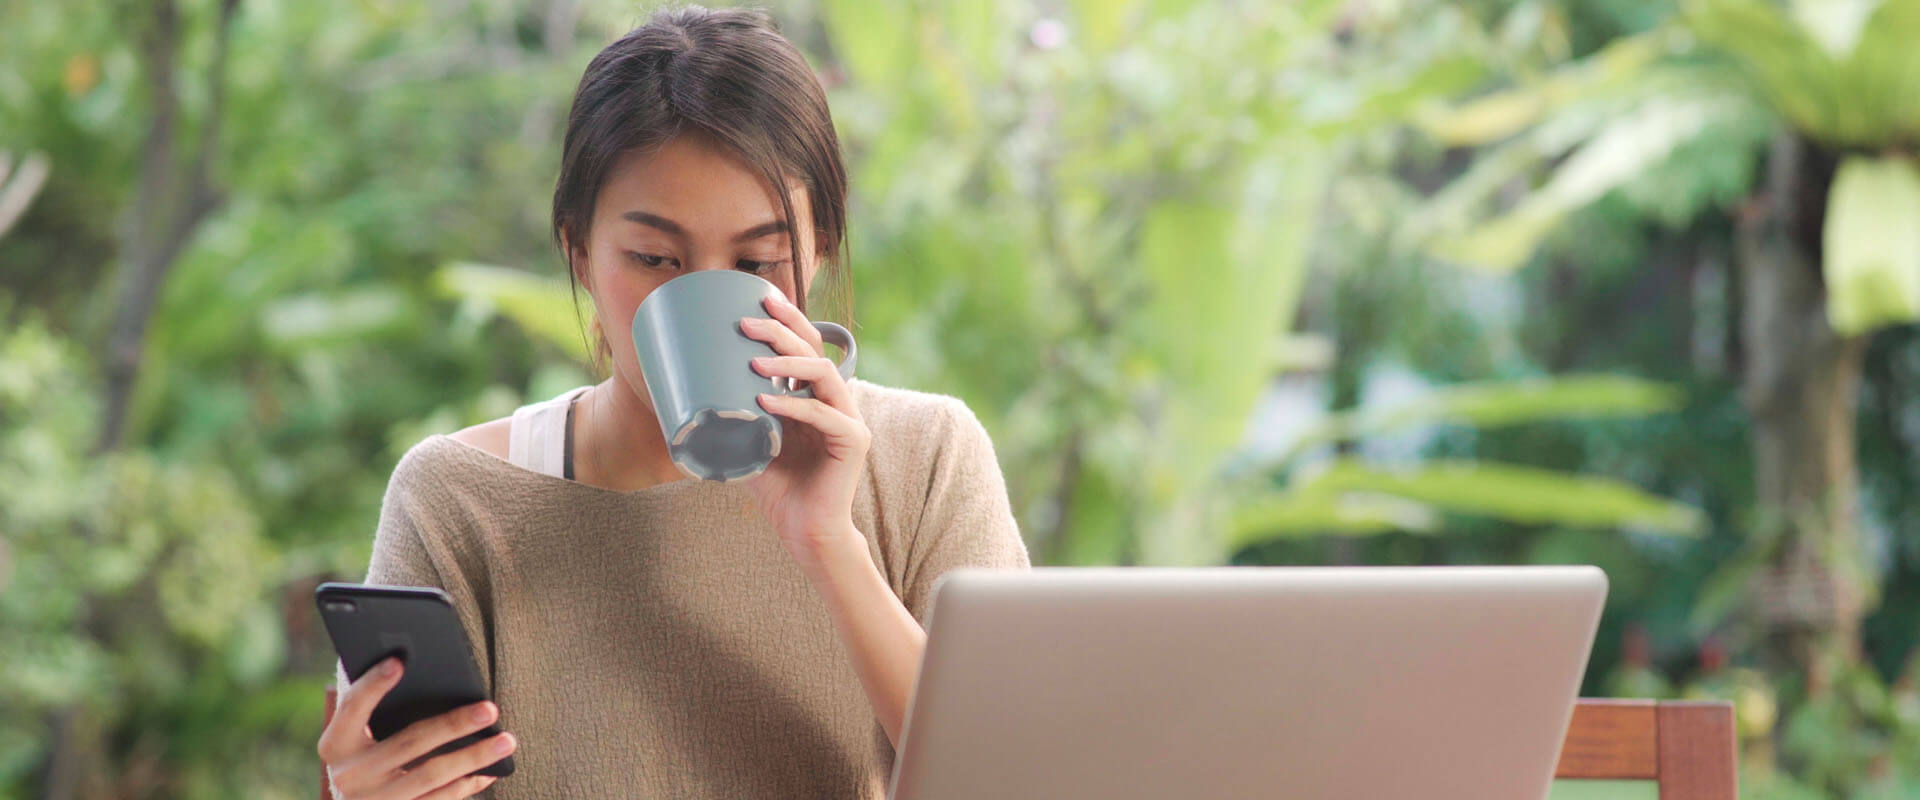 12 WAYS TO LOOK AND FEEL FAB WHILE WORKING FROM HOME